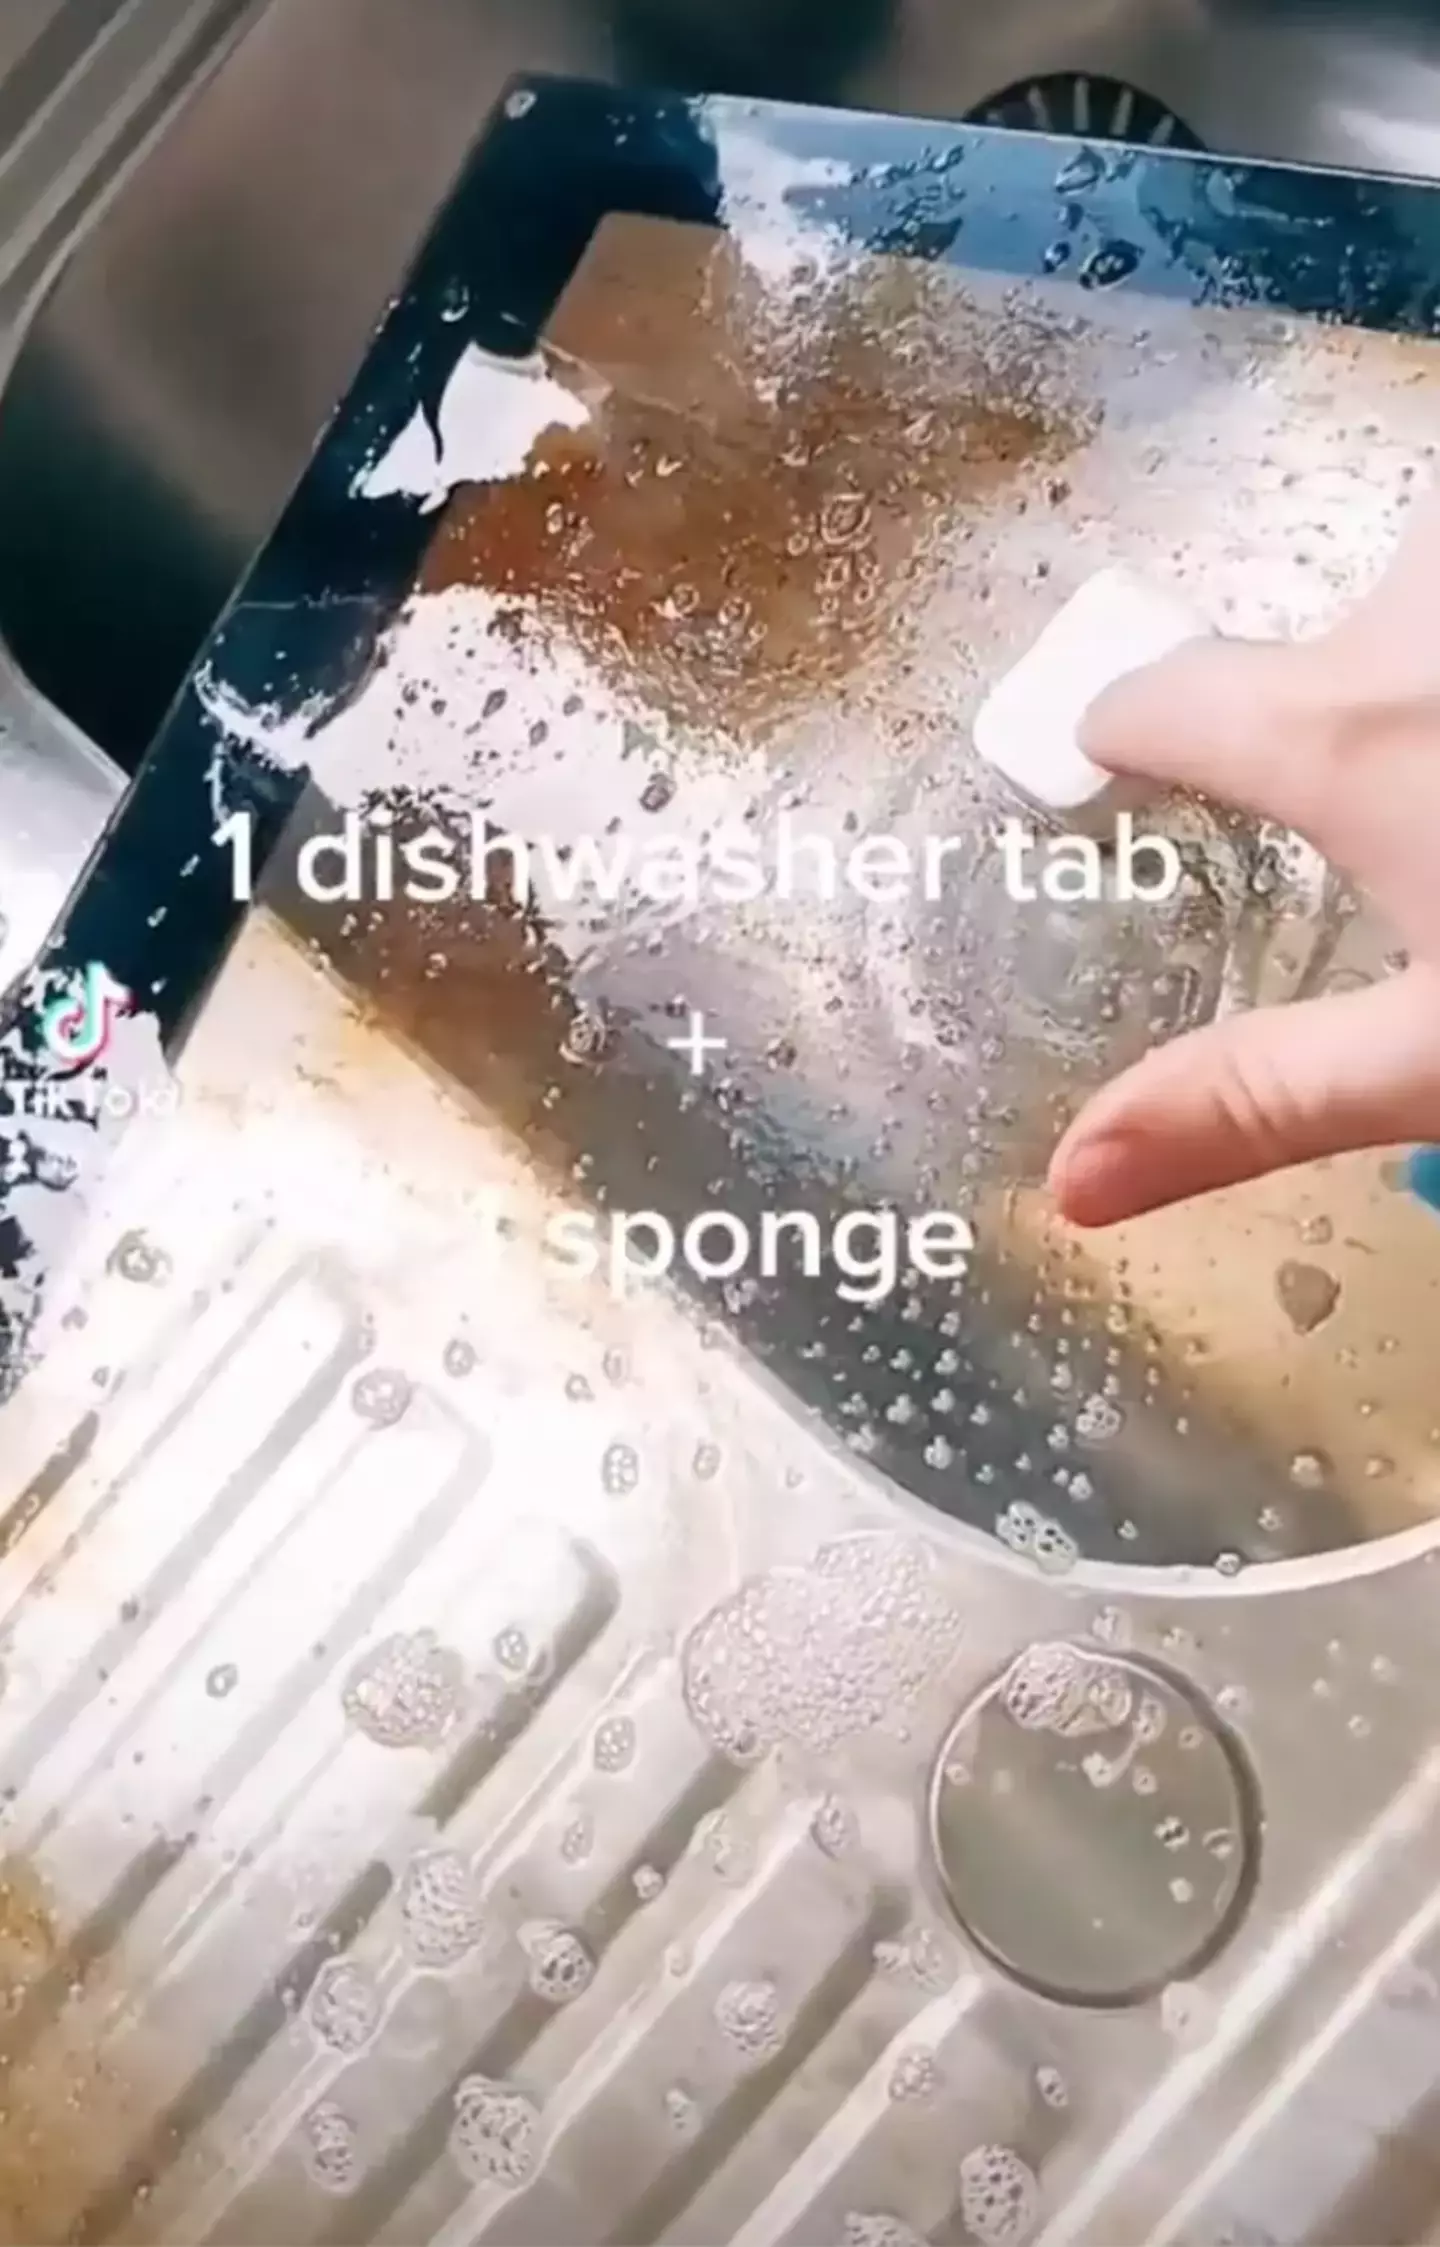 You just need a dishwasher tablet and sponge.